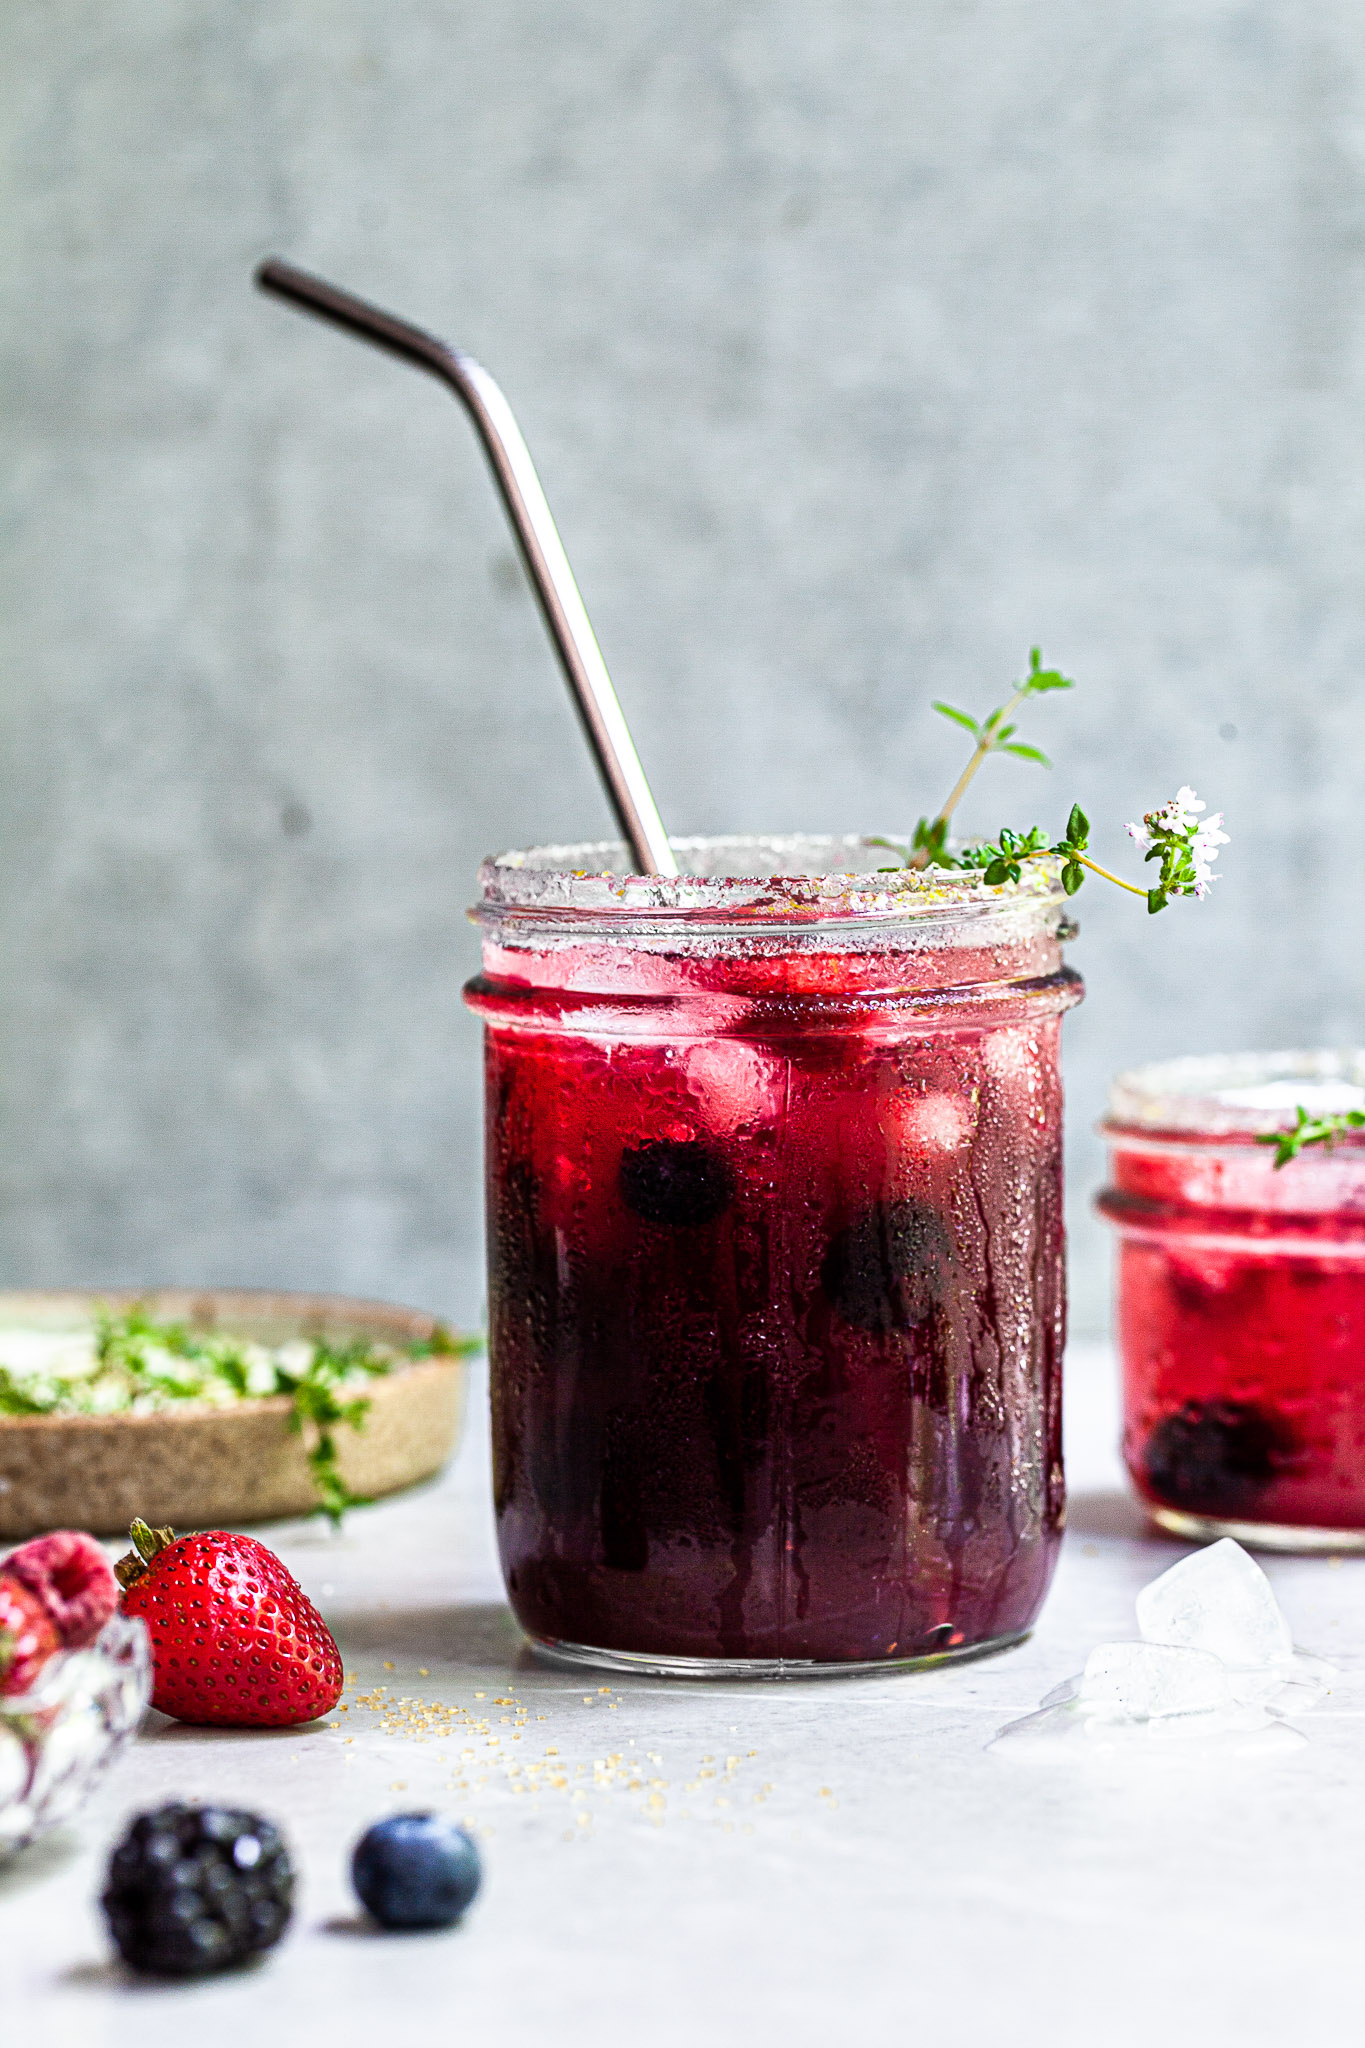 Jar filled with vibrant purplish reddish fizzy drink, garnished with thyme sprigs and served with a straw.